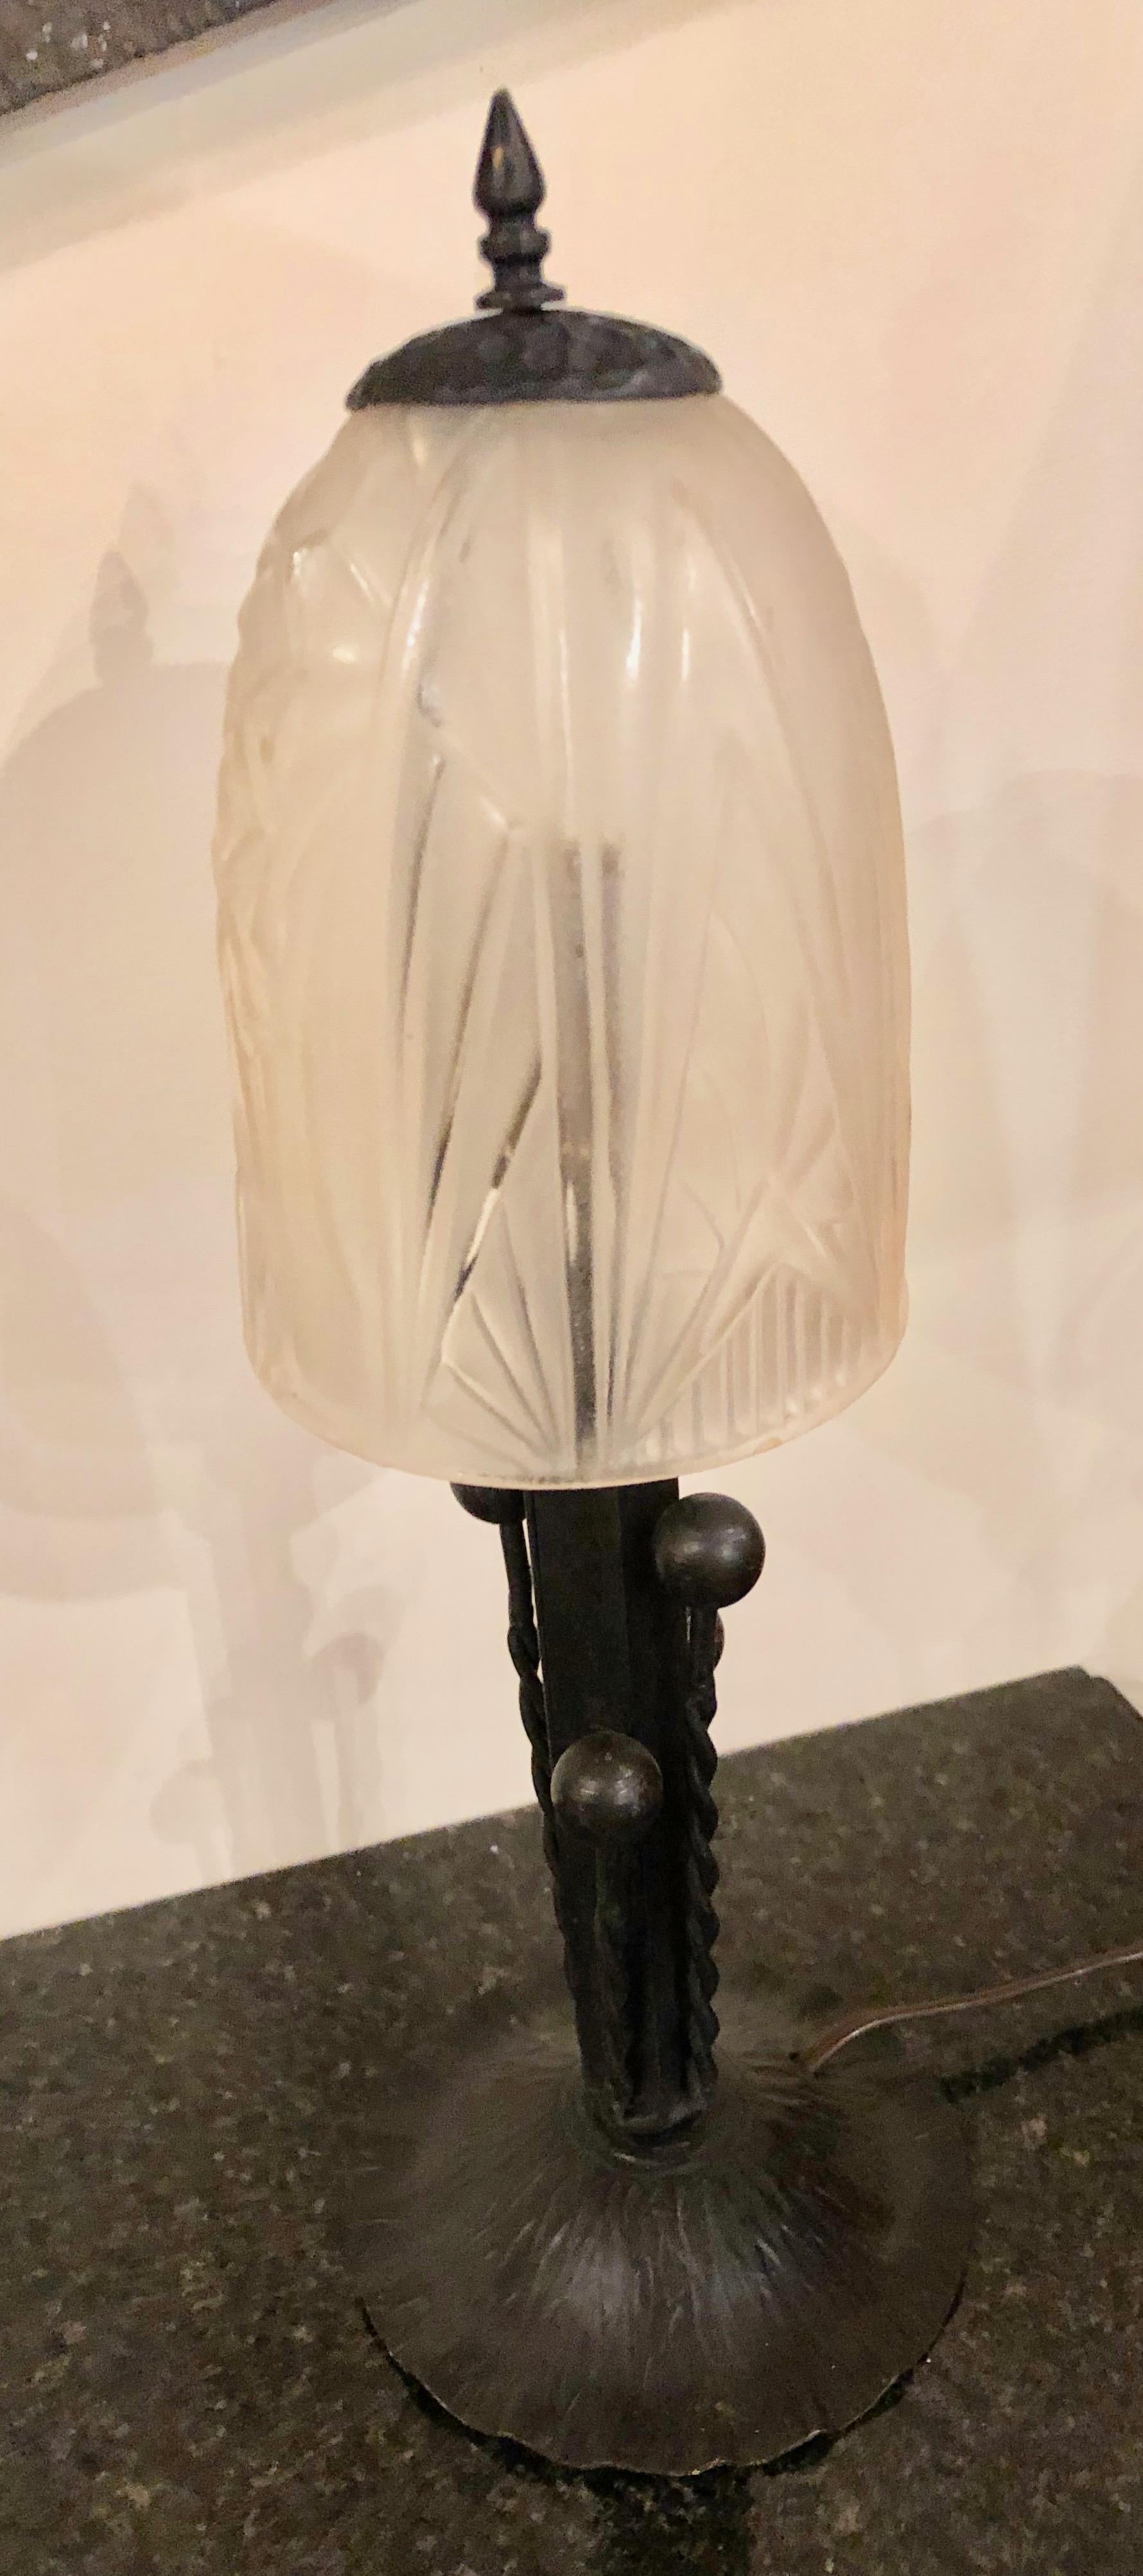 Unique French table lamp with stylized moulded glass after Degue or Muller Freres. Simple elegant shape and design. Rewired with original style on or off switch and also has original French style B-22 socket. Designed circa 1925-1930 with an unusual